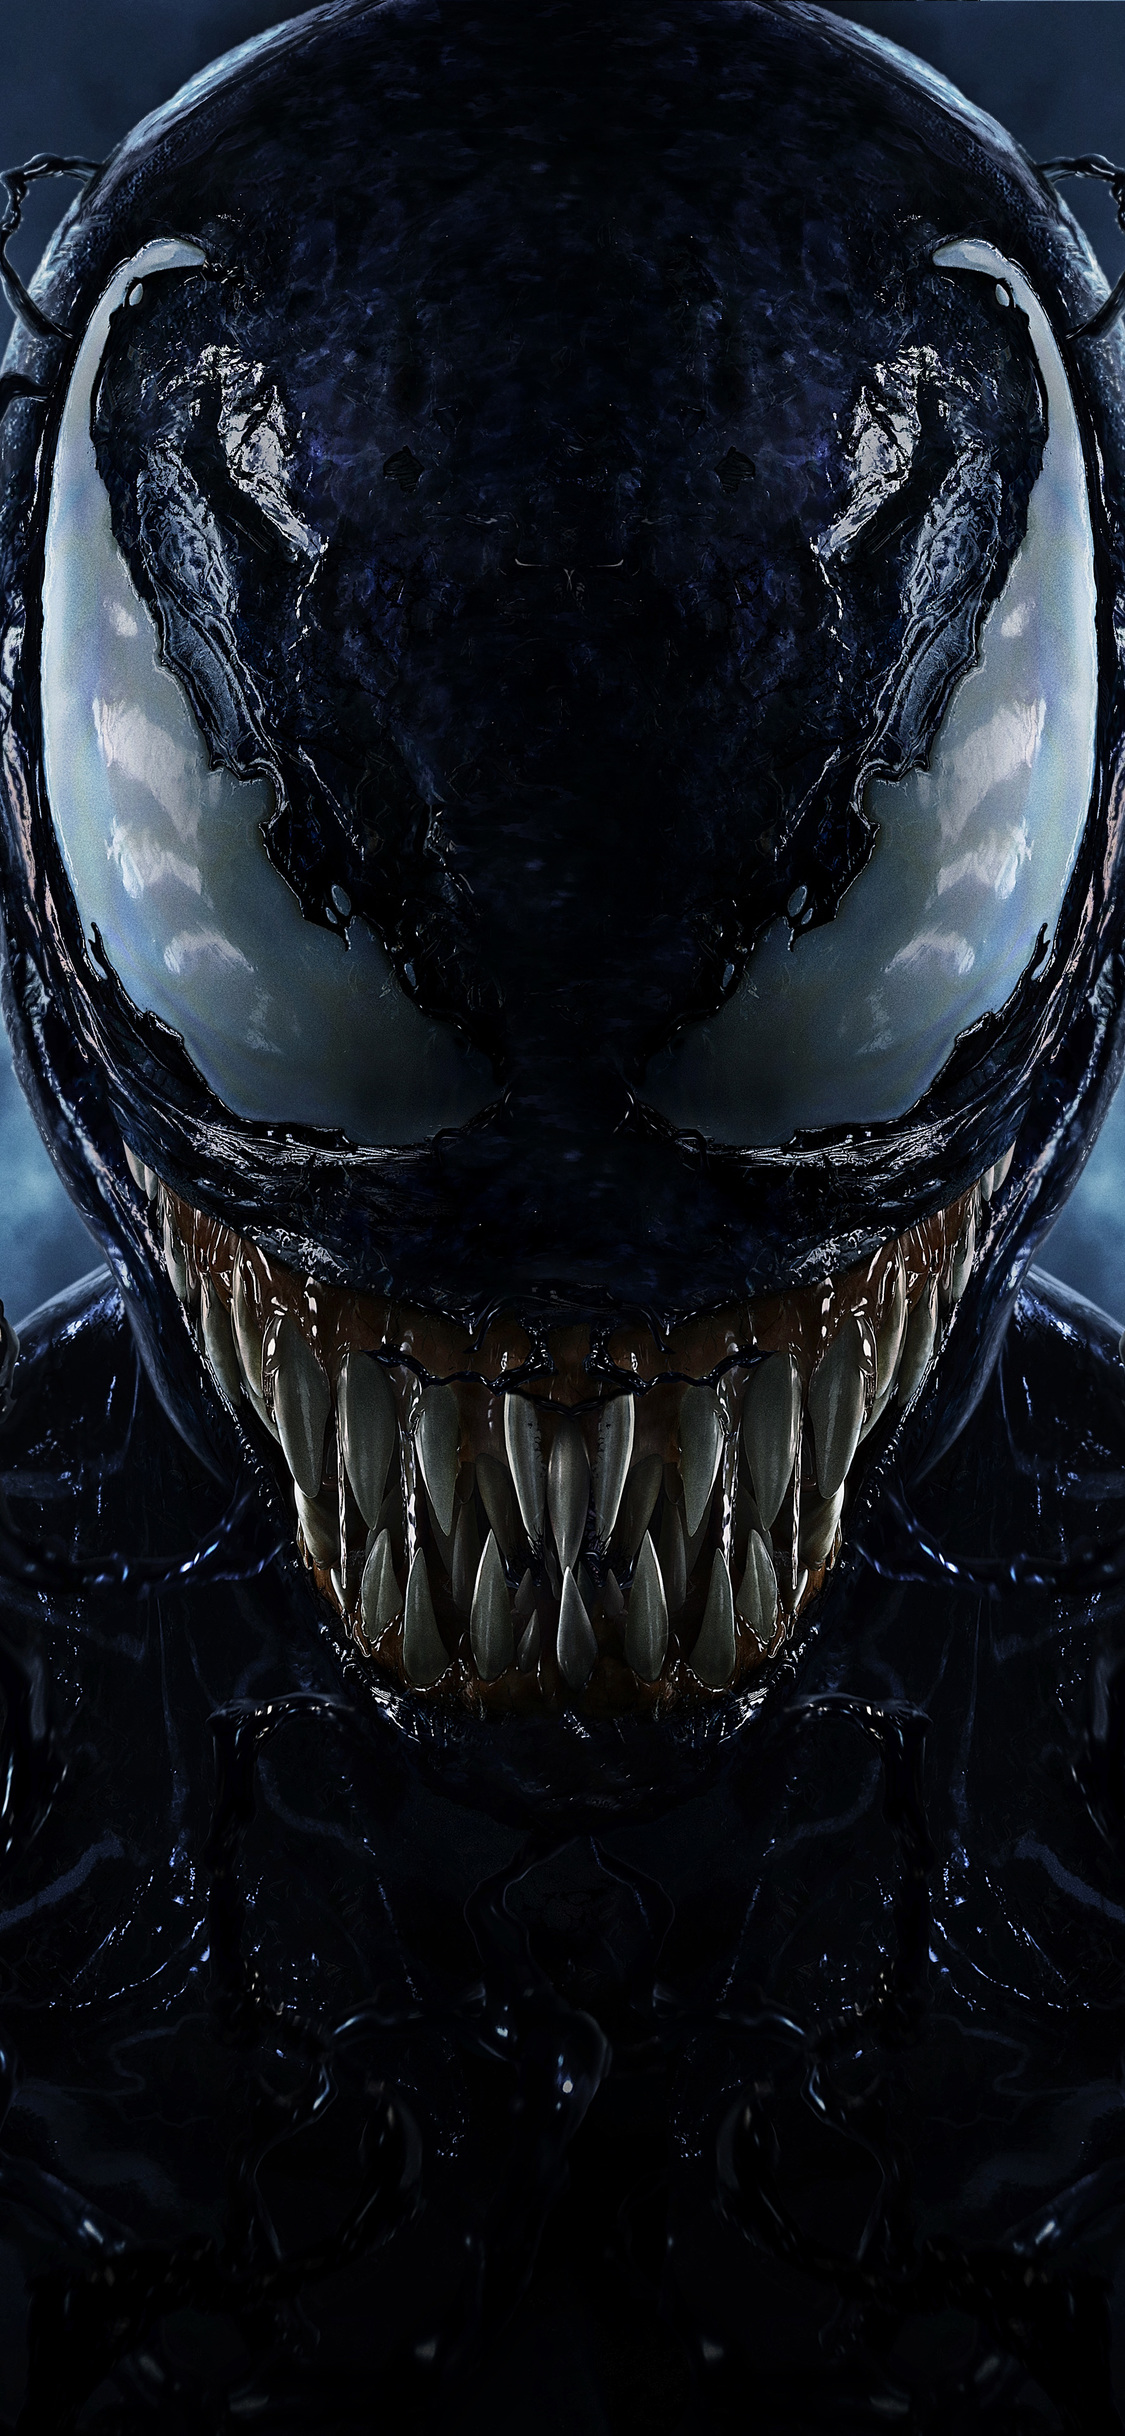 Iphone XS Wallpaper Venom Movie 4297 Wallpapers and Free Stock